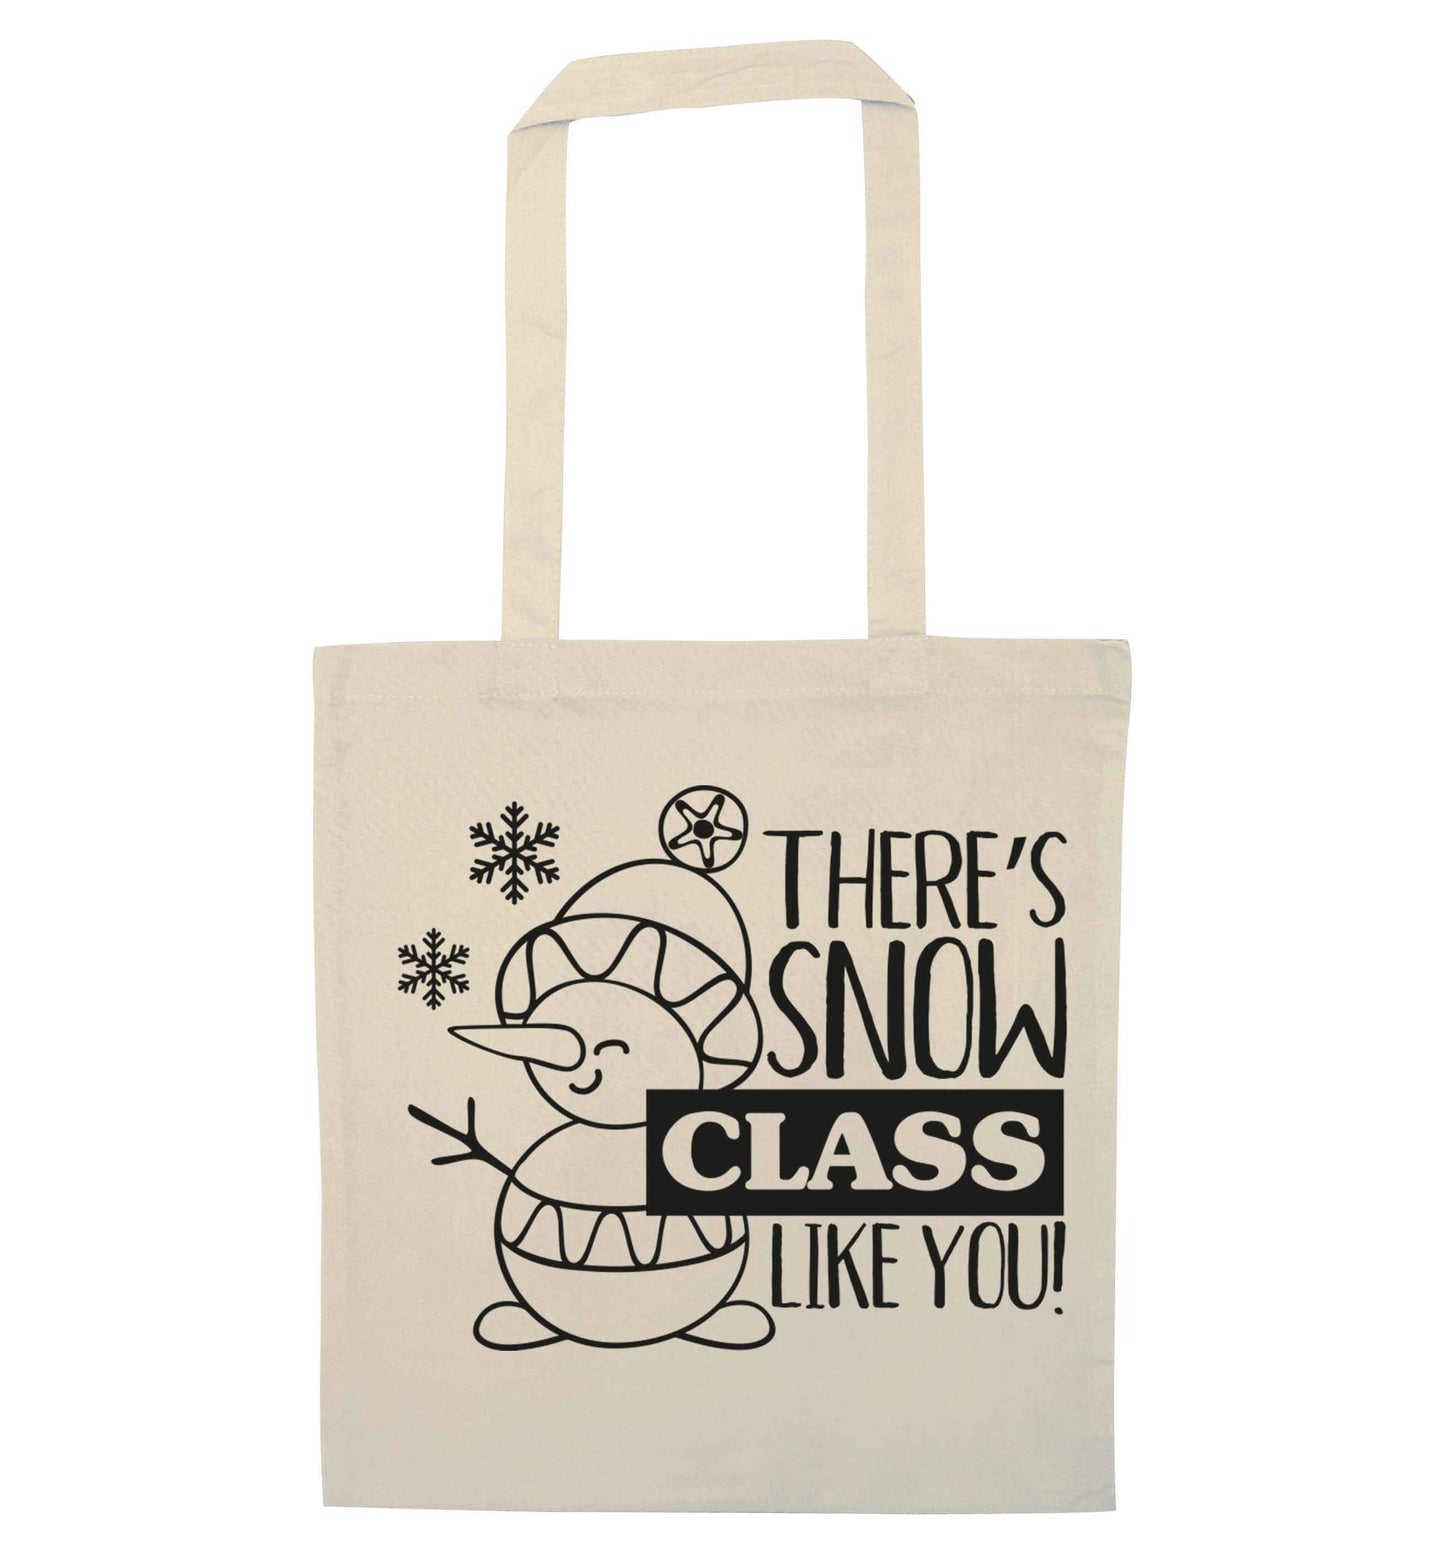 There's snow class like you natural tote bag